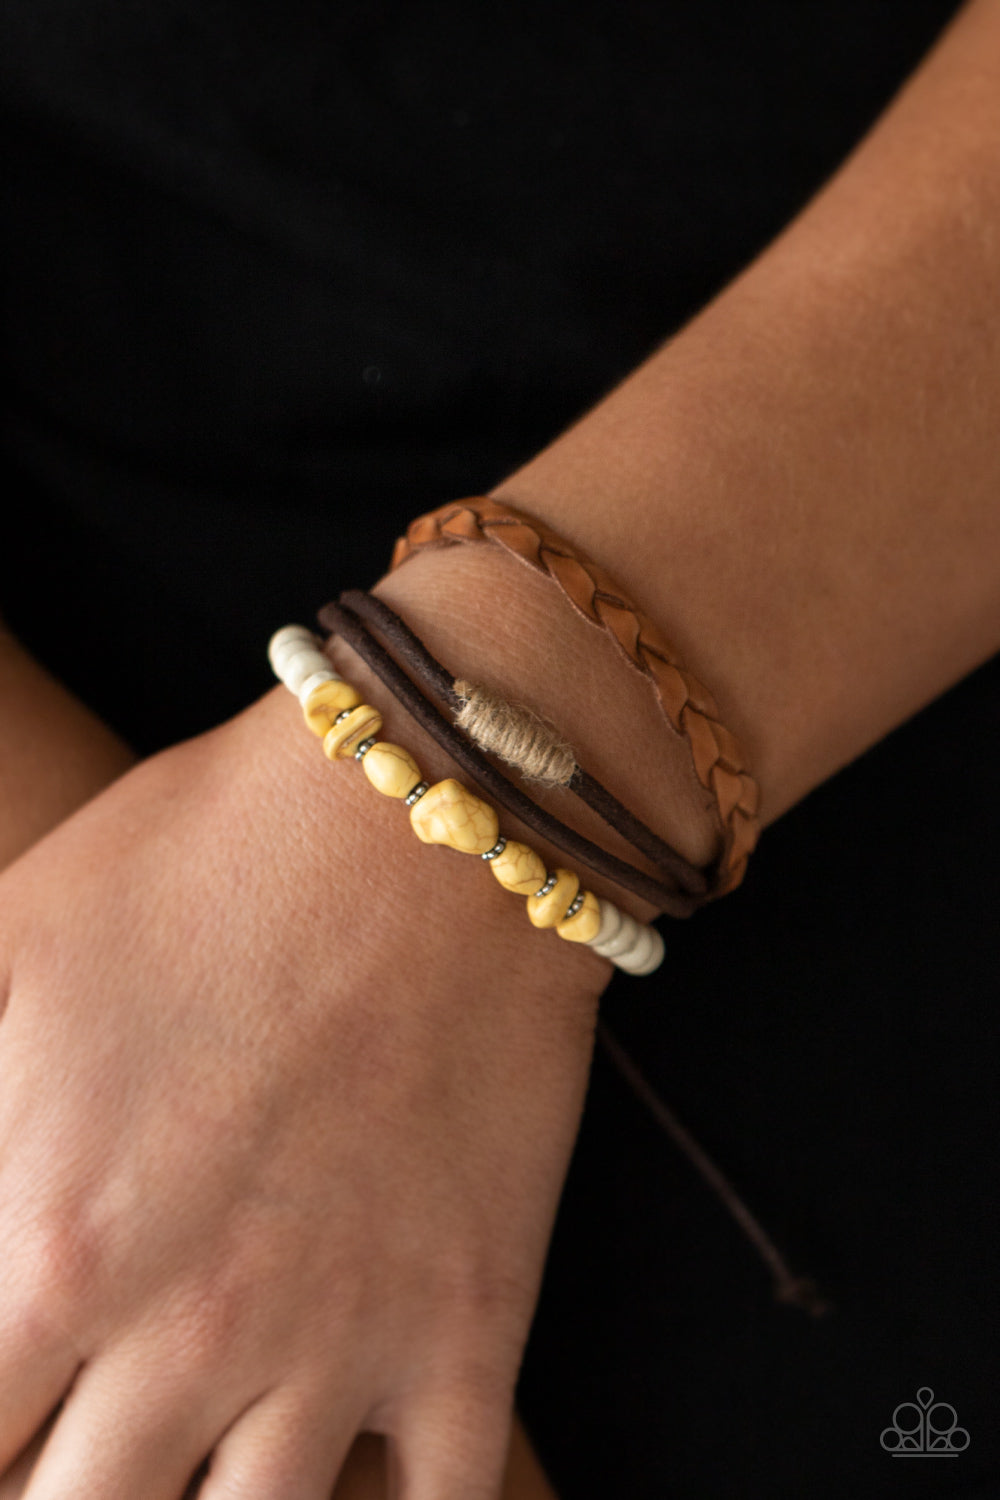 Far Out Wayfair Yellow Urban Bracelet - Paparazzi Accessories  Mismatched strands of brown suede, braided brown leather, and yellow stones and white wooden beads layer across the wrist for a colorful seasonal look. Features an adjustable sliding knot closure.  Sold as one individual bracelet.